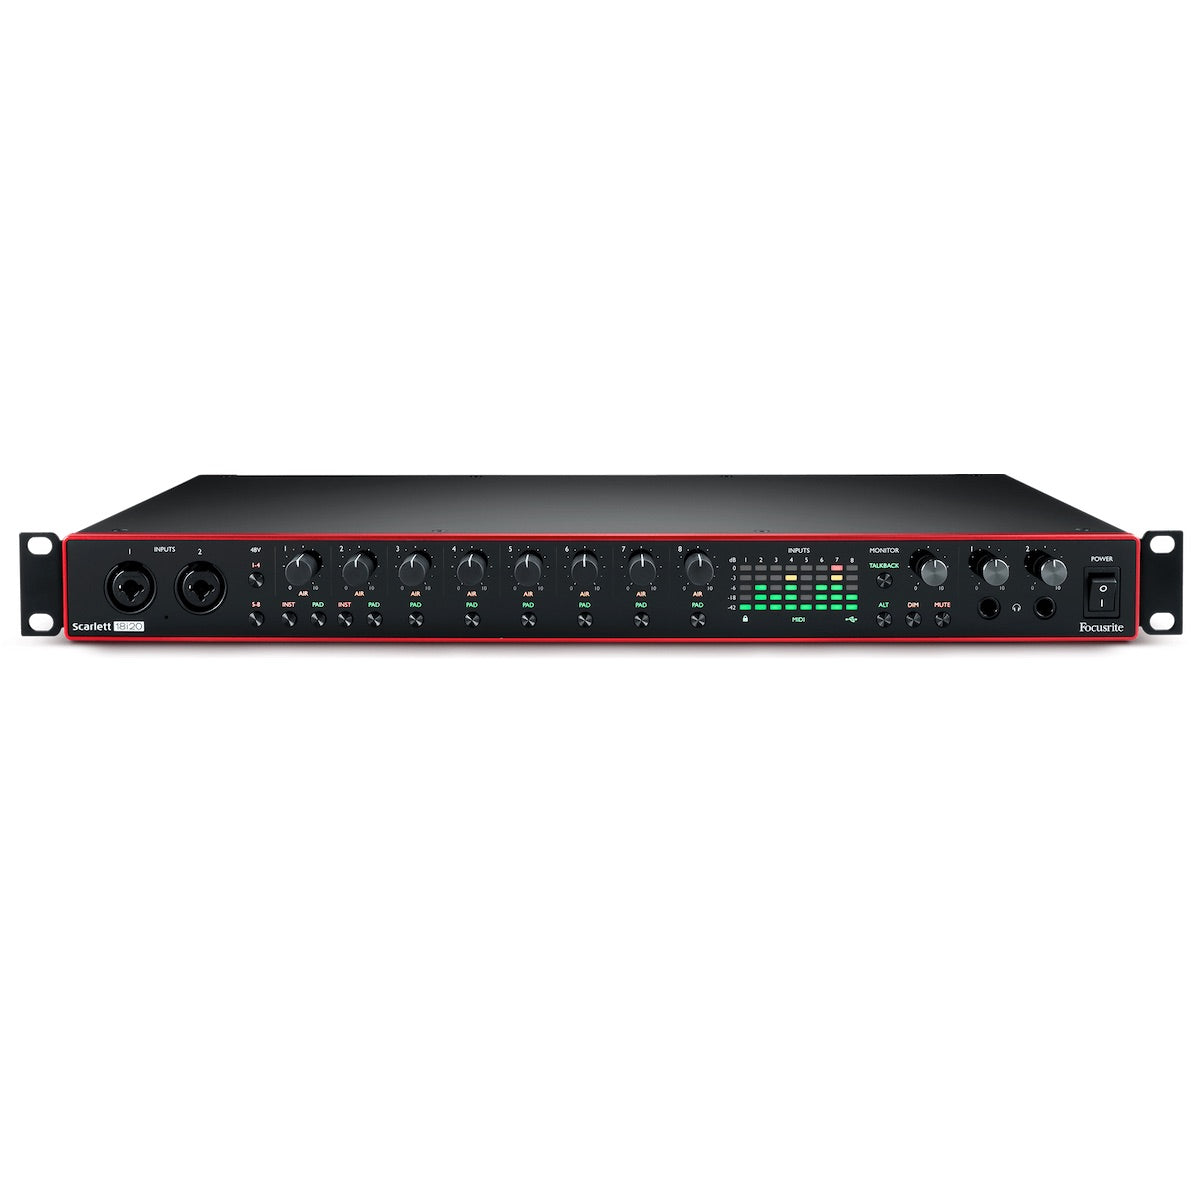 Focusrite Scarlett 18i20 - USB 2.0 Audio Interface with 18-in/20-out (3rd Gen), front